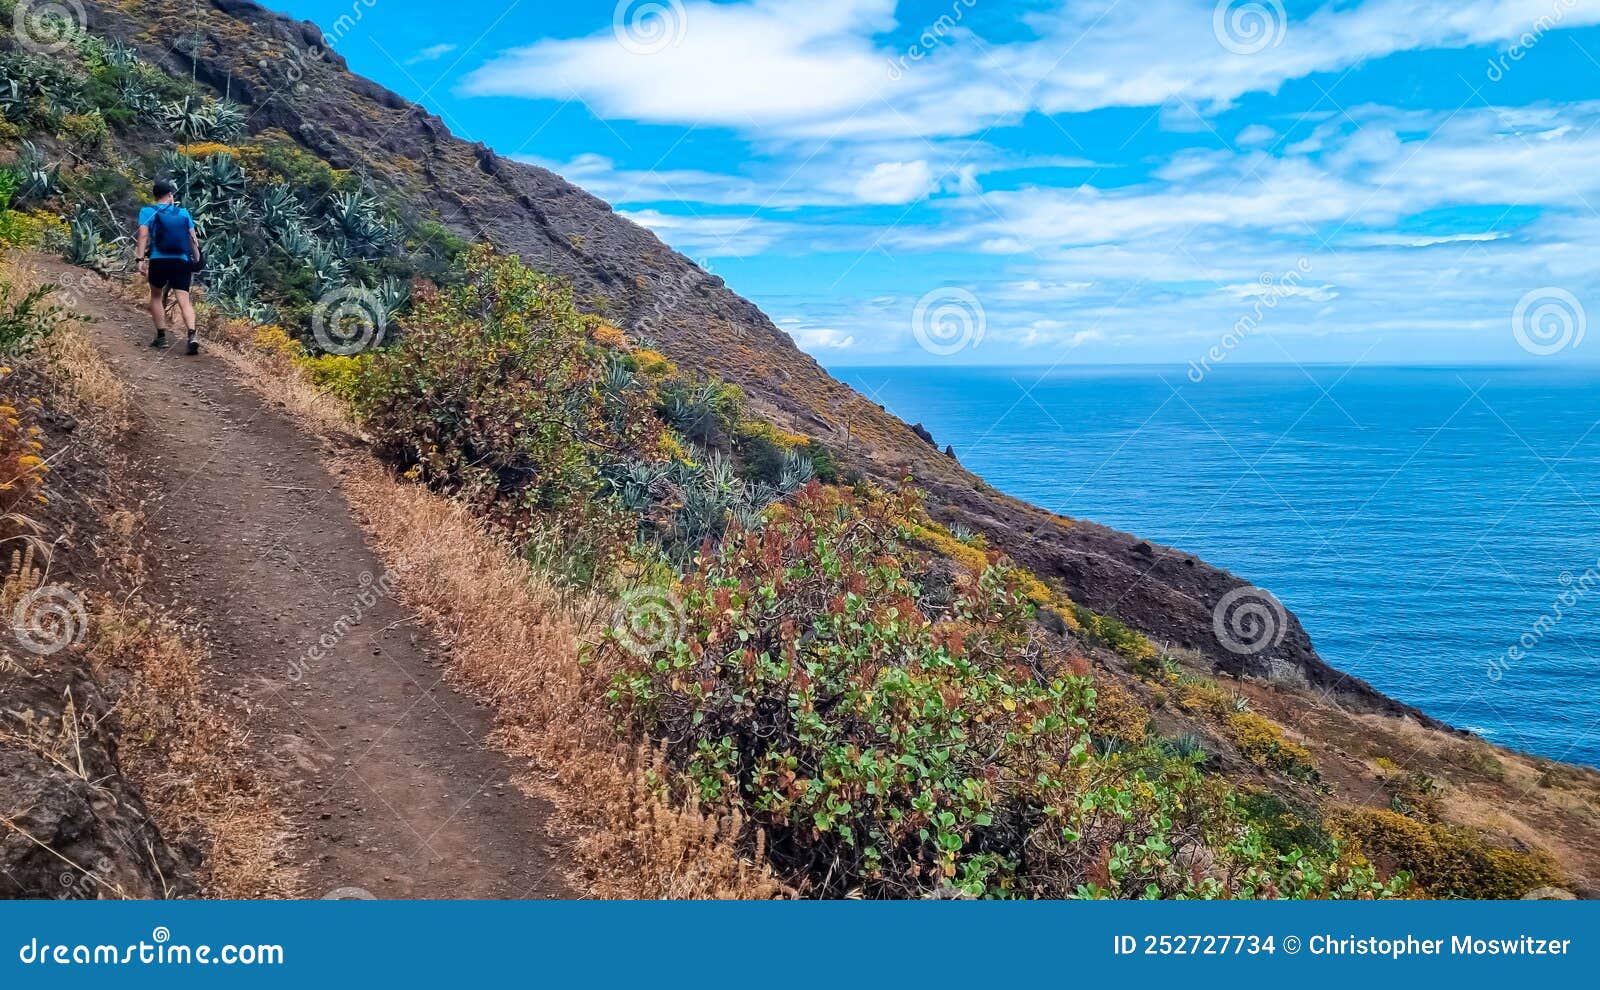 hiking man with scenic view of coastline of anaga mountain range on tenerife, canary islands, spain. view on cabezo el tablero